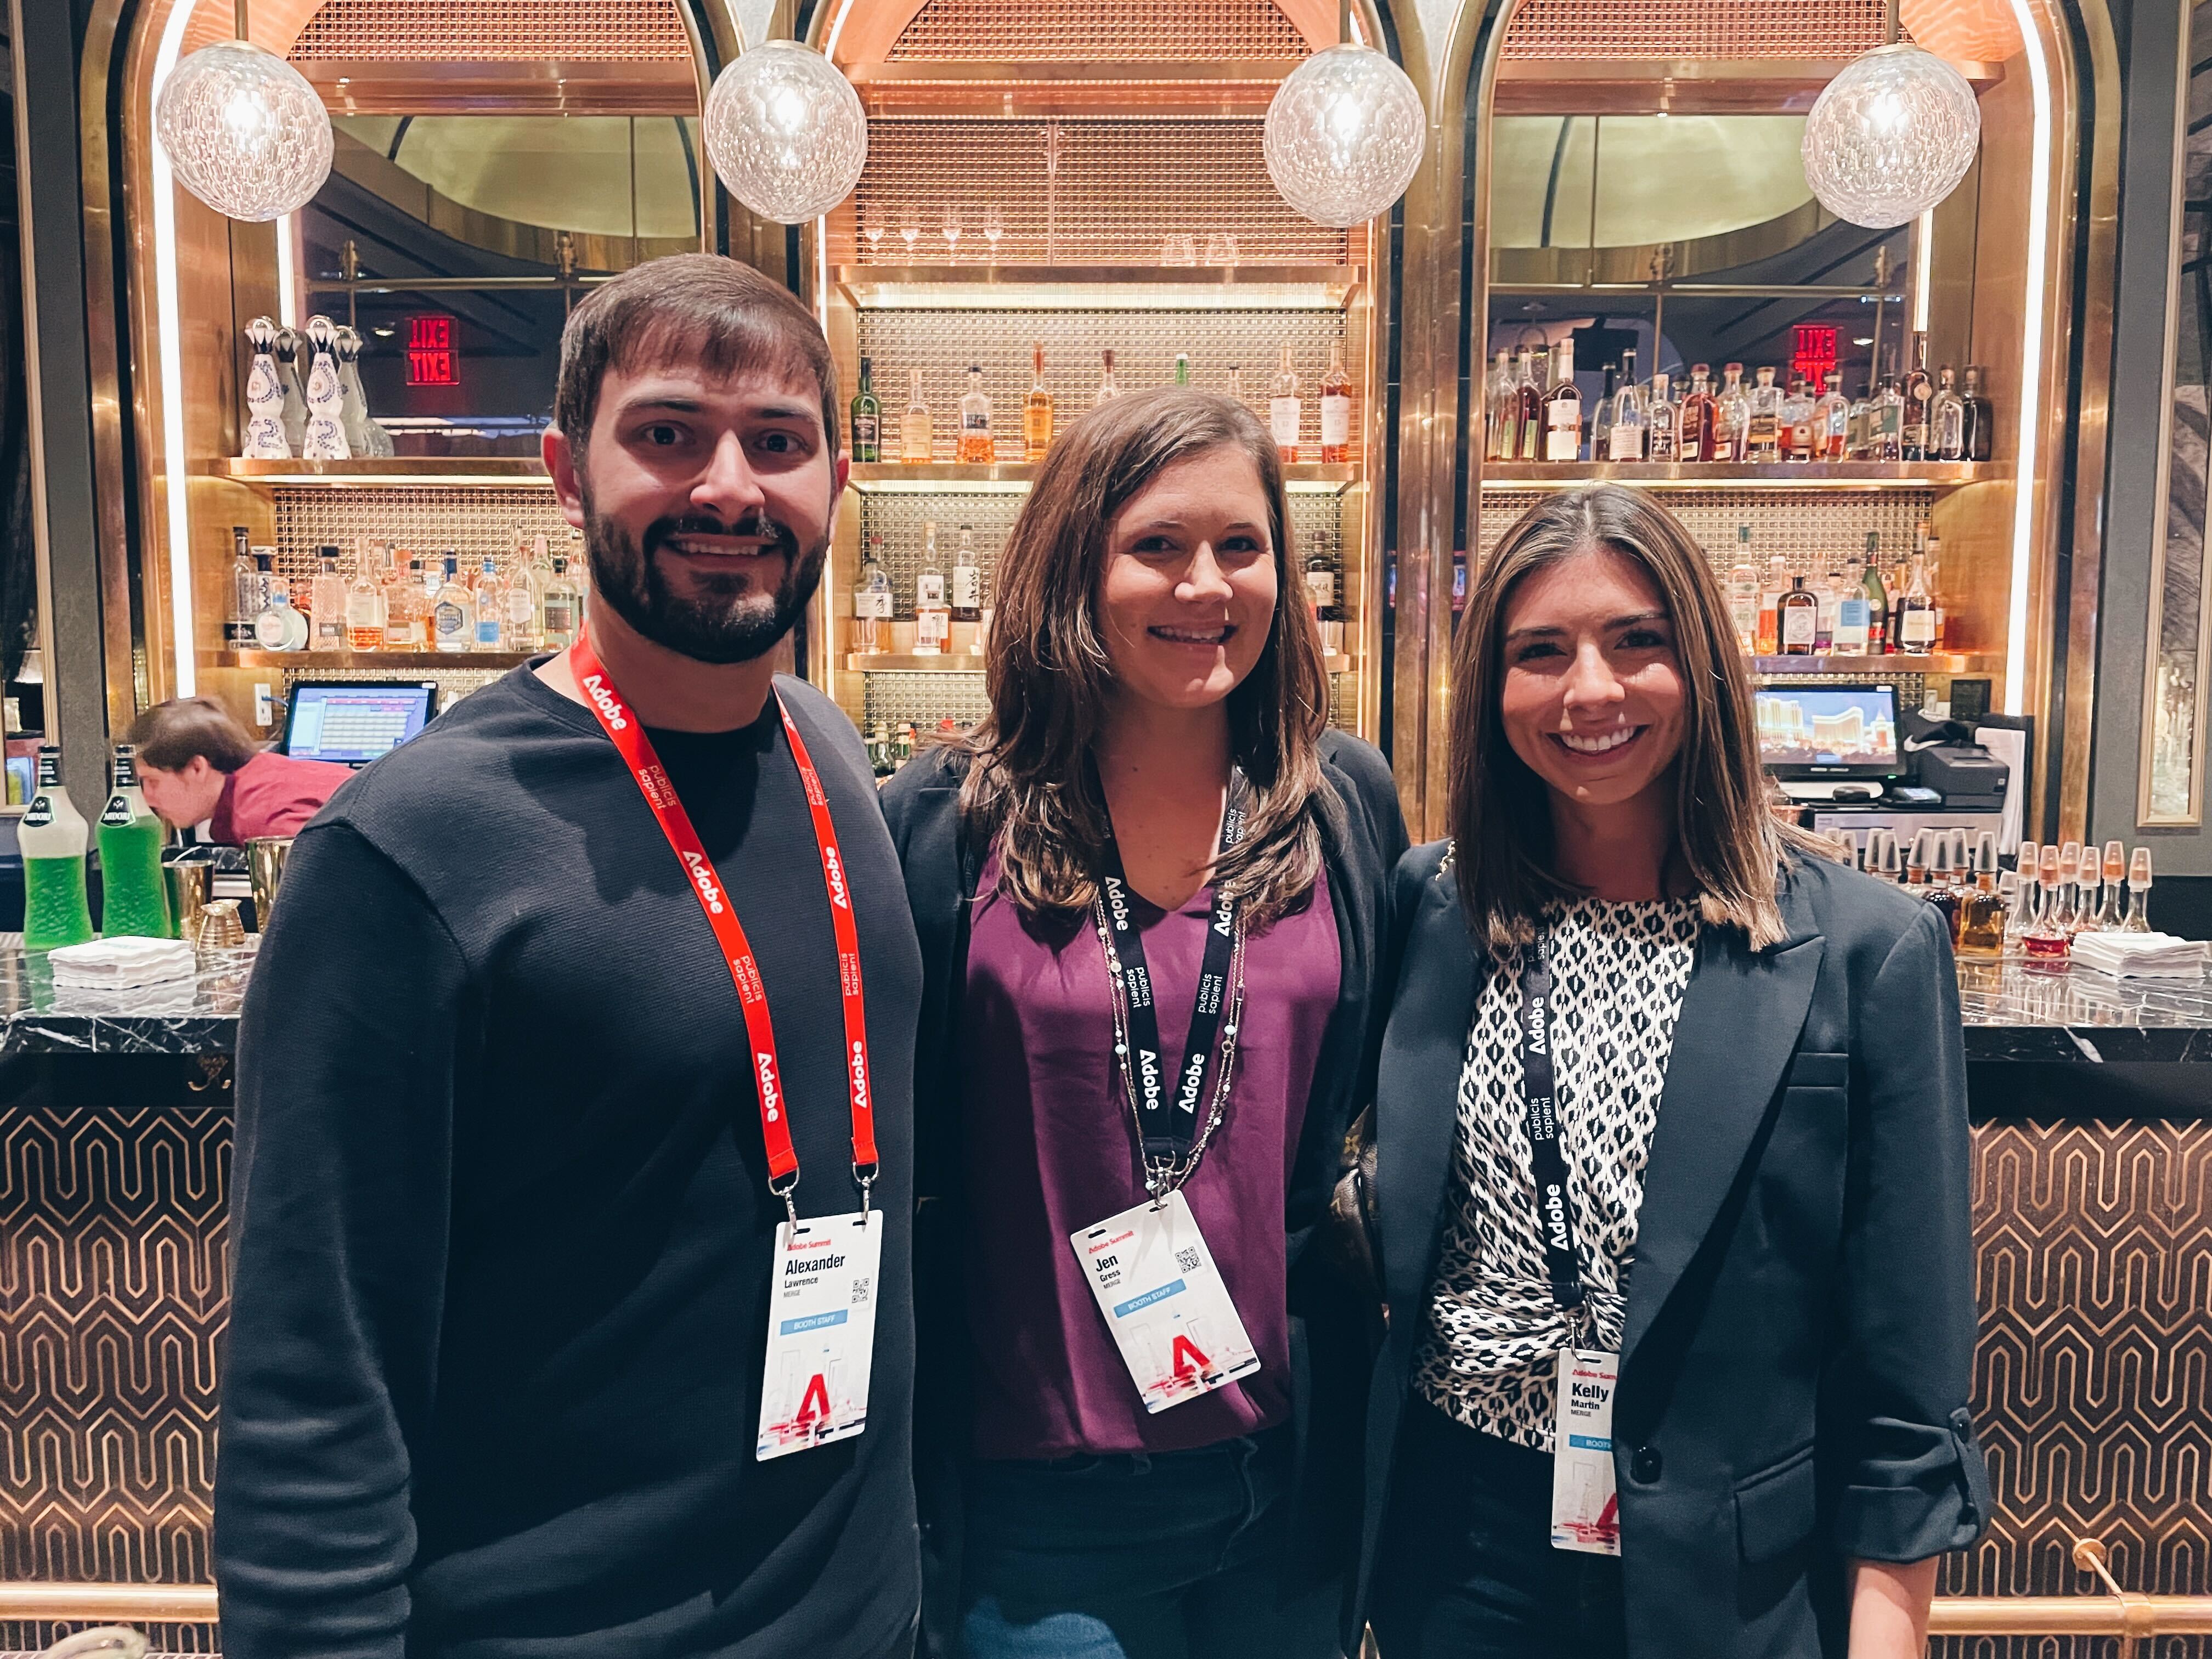 A few members of the MERGE sales team, Alexander Lawerence, Jen Gress, and Kelly Martin, at the private cocktail event.